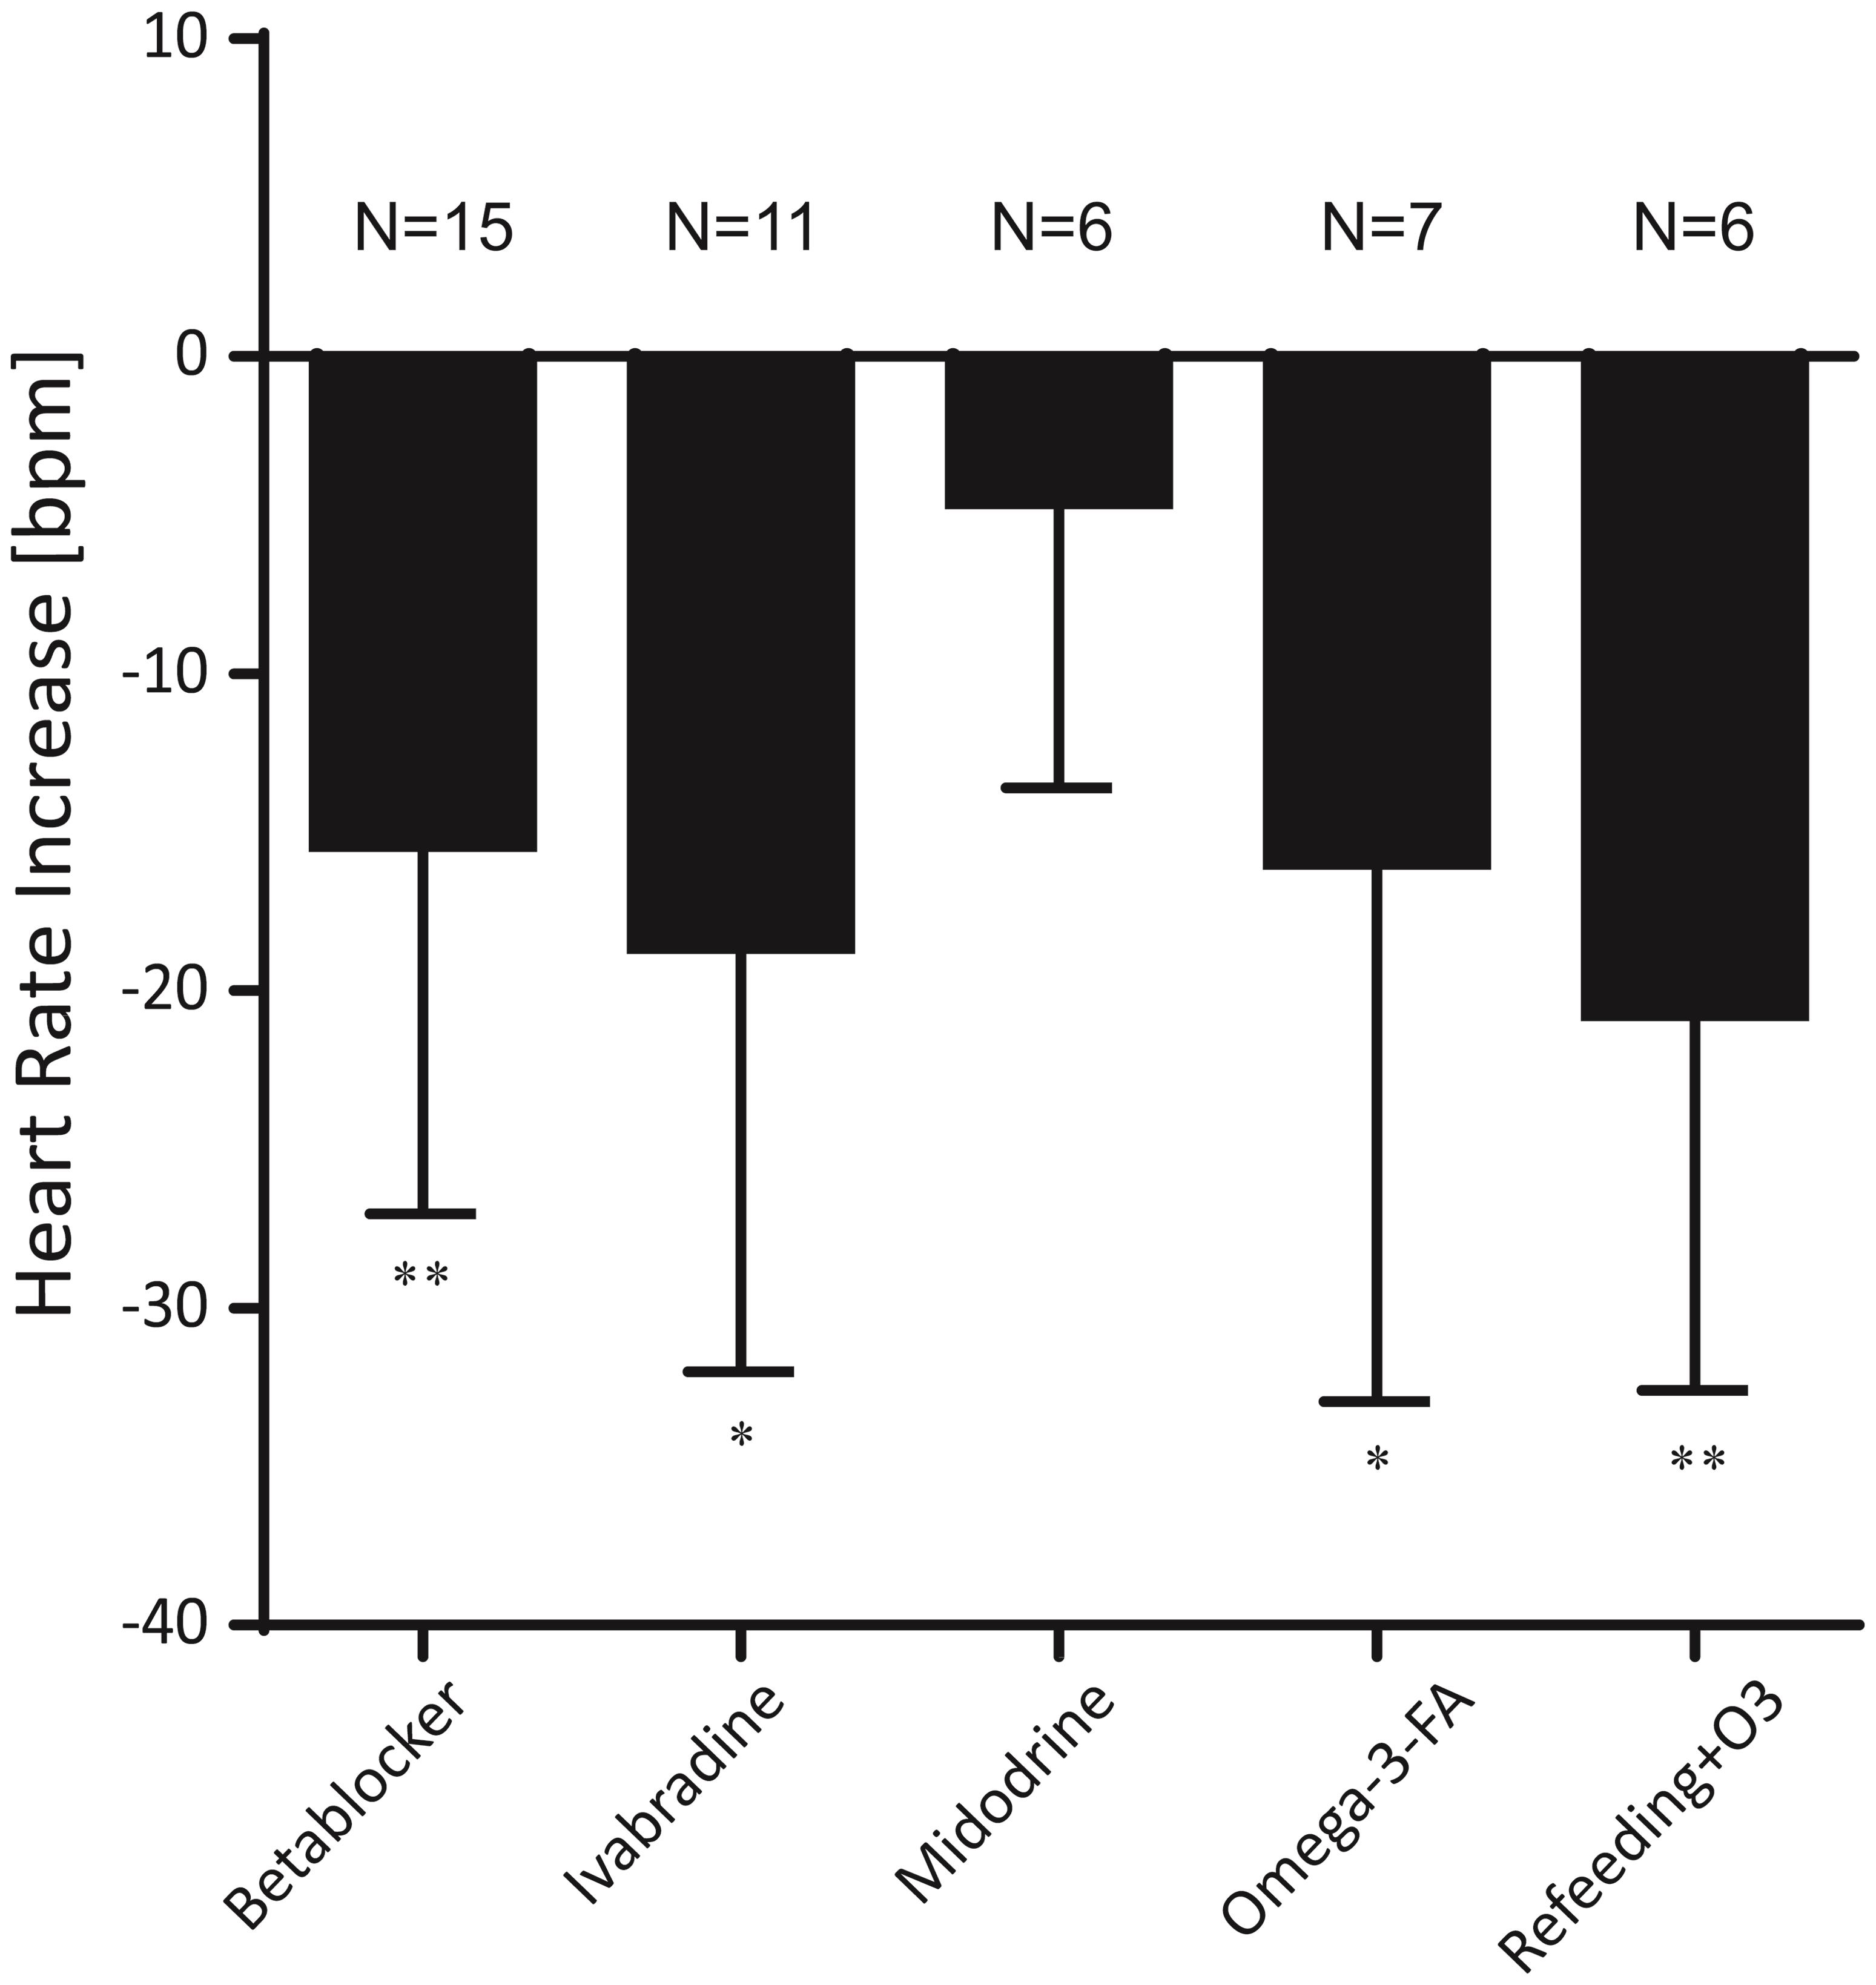 The effect of pharmacotherapy, Omega-3-Fatty acid supplementation and refeeding in 6 patients with anorexia nervosa and postural orthostatic tachycardia.